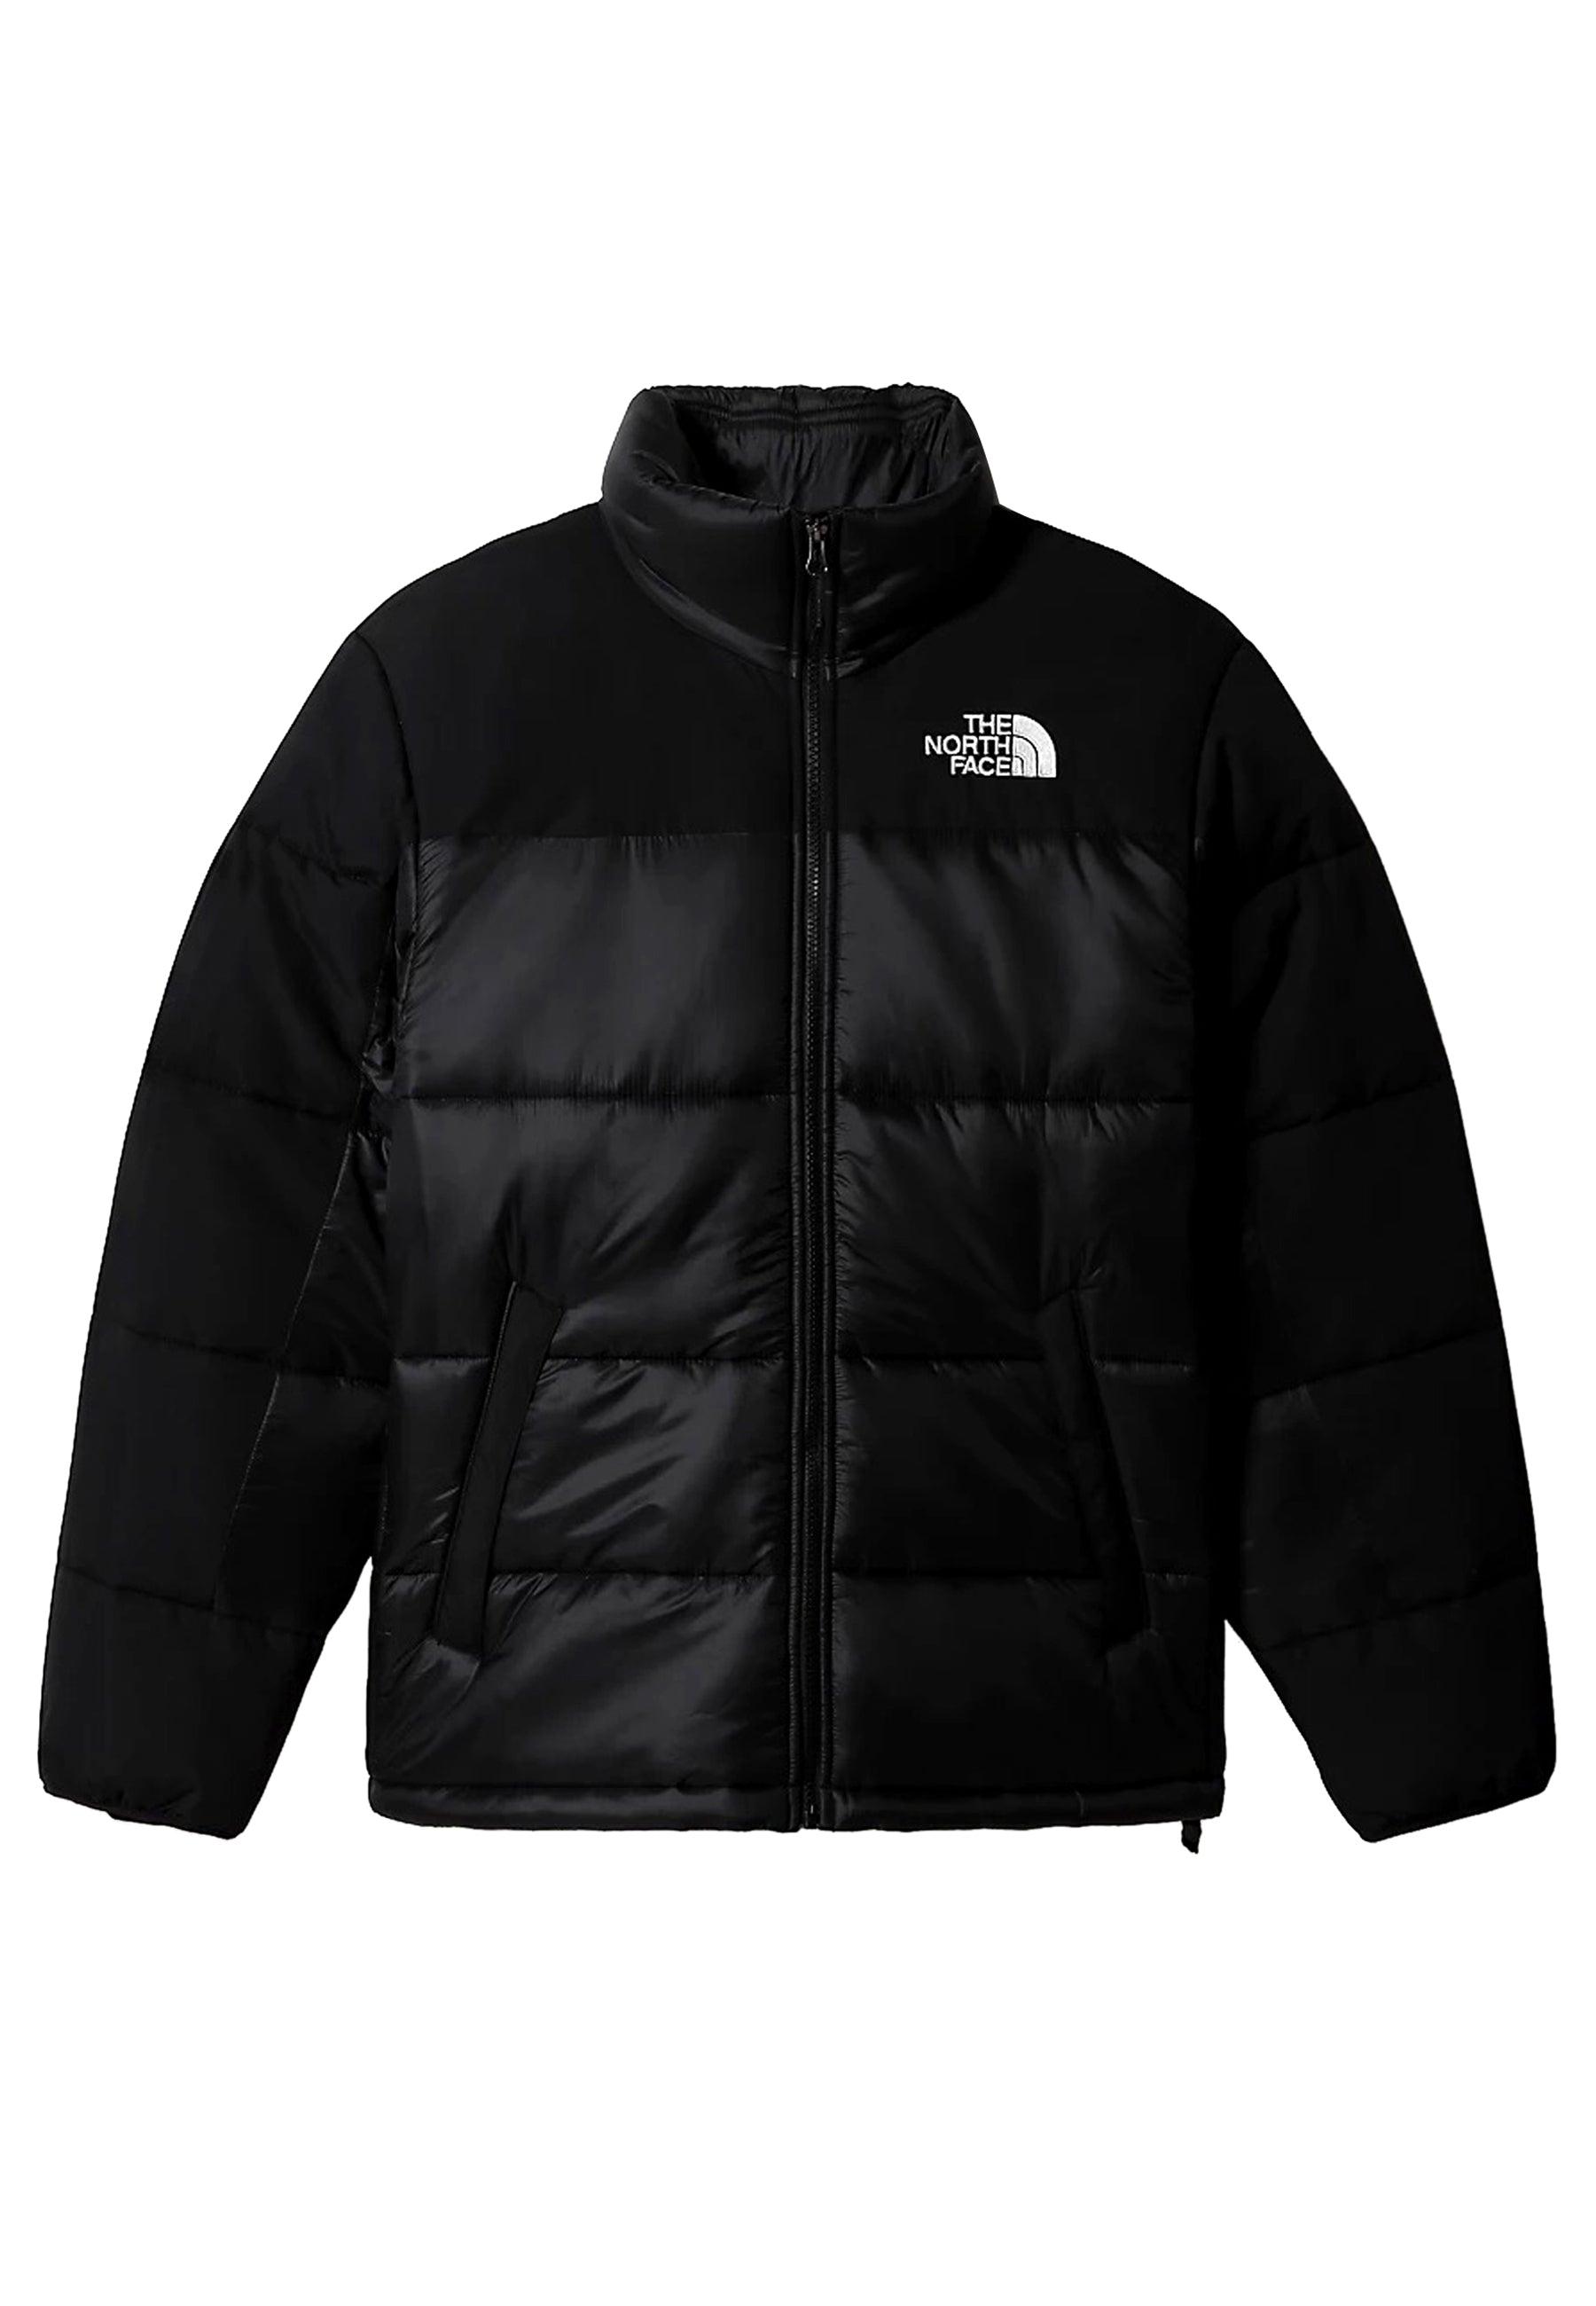 The North Face Jacket Himalayan Black for Men | Lyst